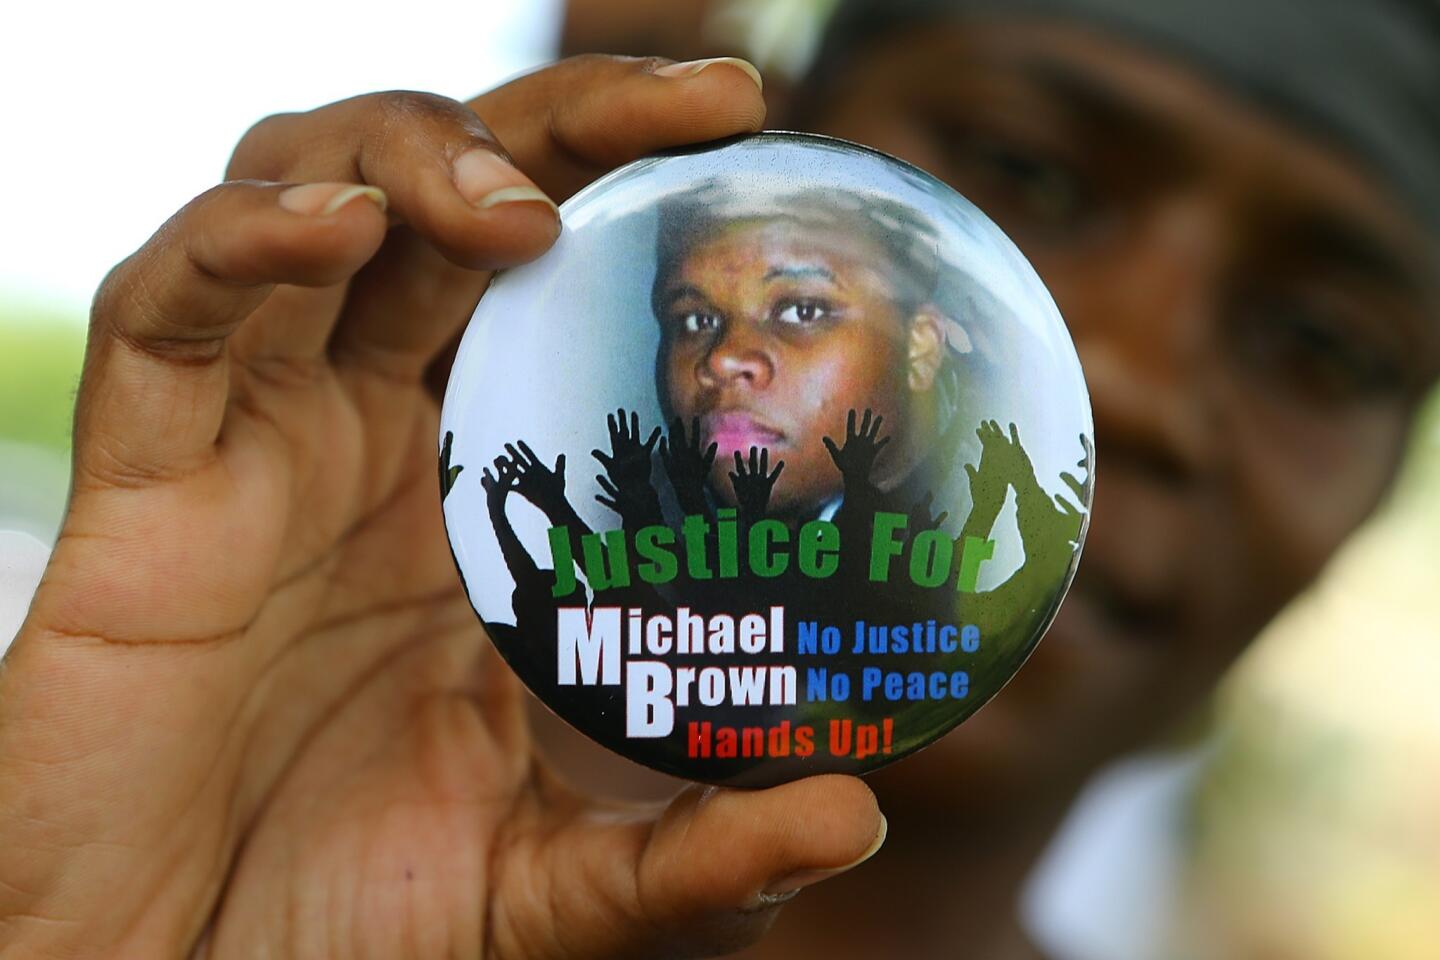 "Justice for Michael Brown"